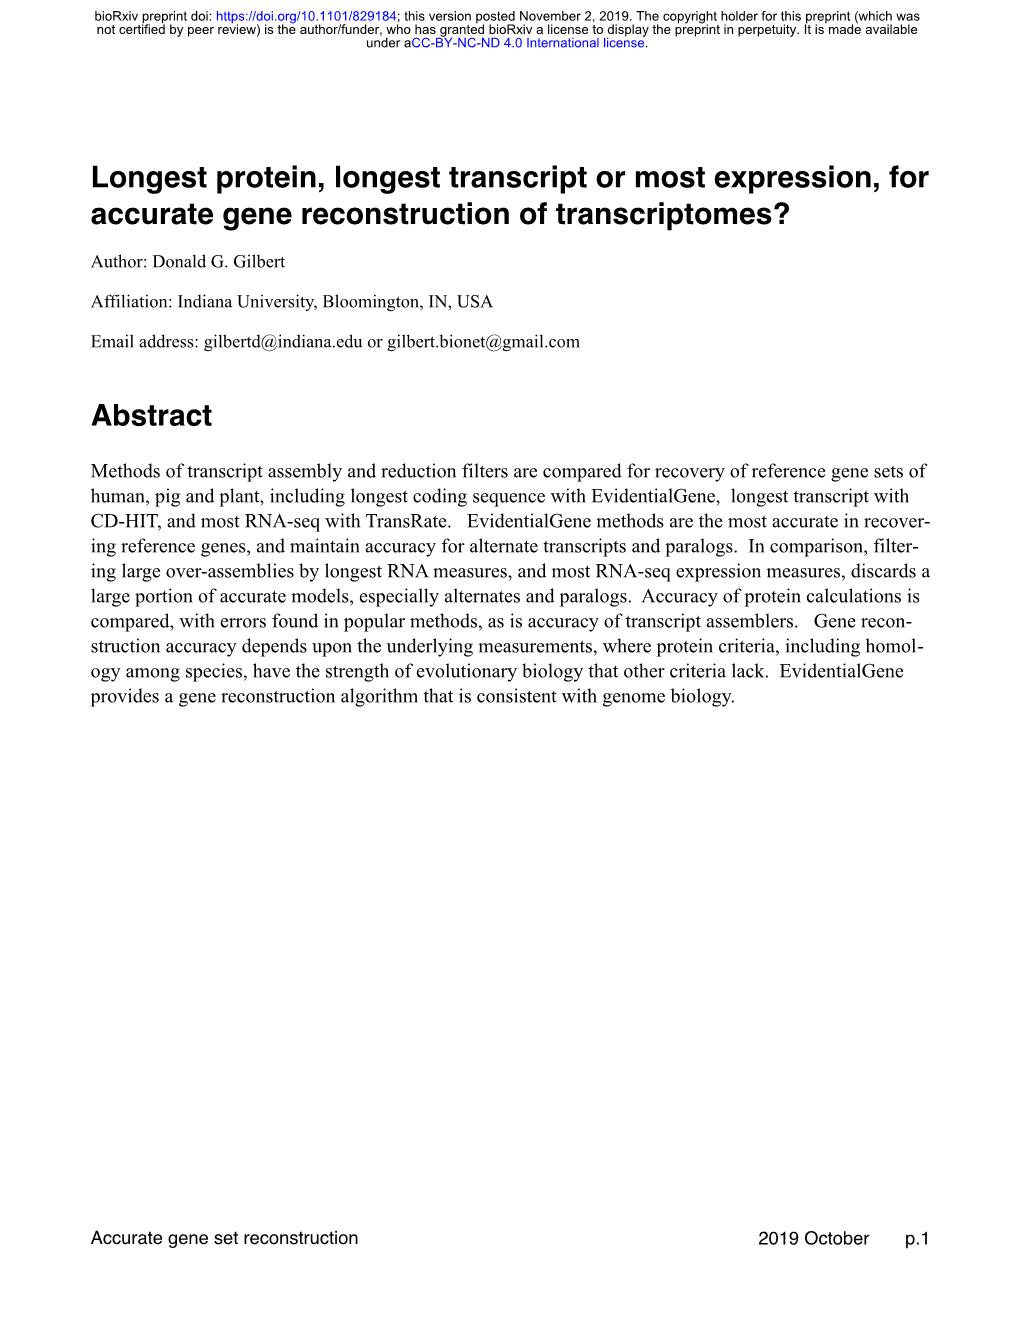 Longest Protein, Longest Transcript Or Most Expression, for Accurate Gene Reconstruction of Transcriptomes?